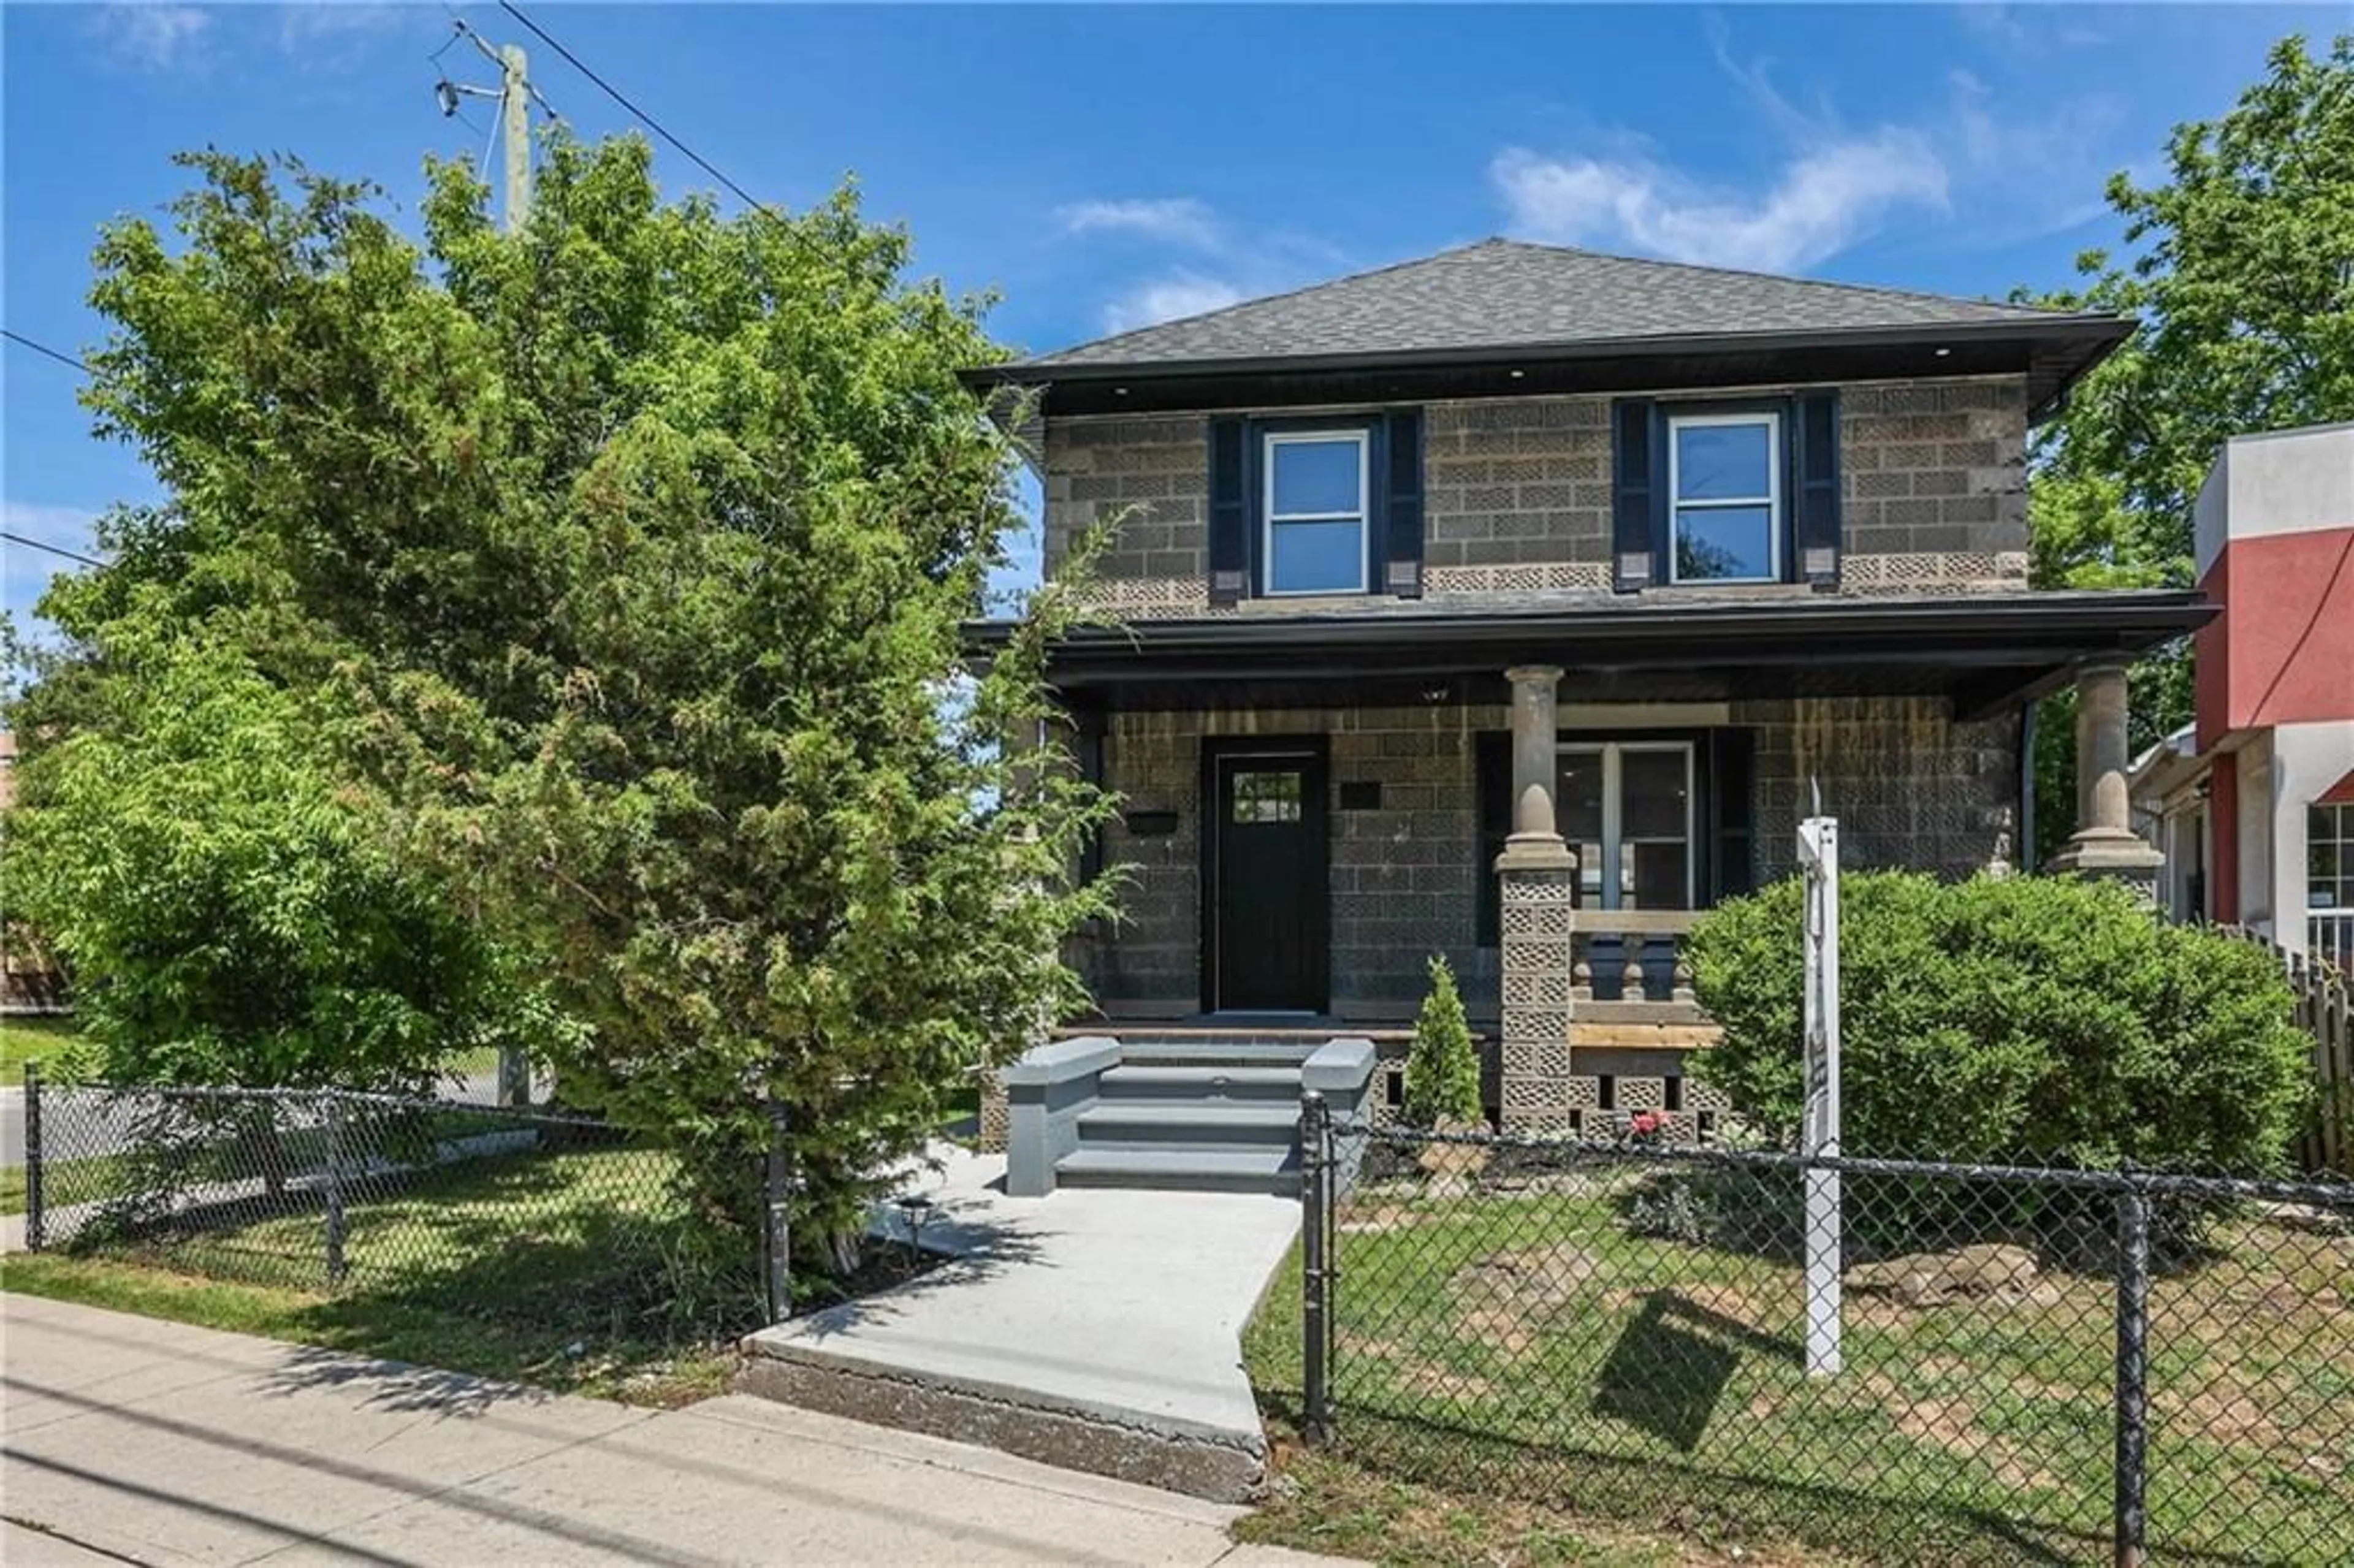 Home with brick exterior material for 193 QUEENSTON St, St. Catharines Ontario L2R 3A4